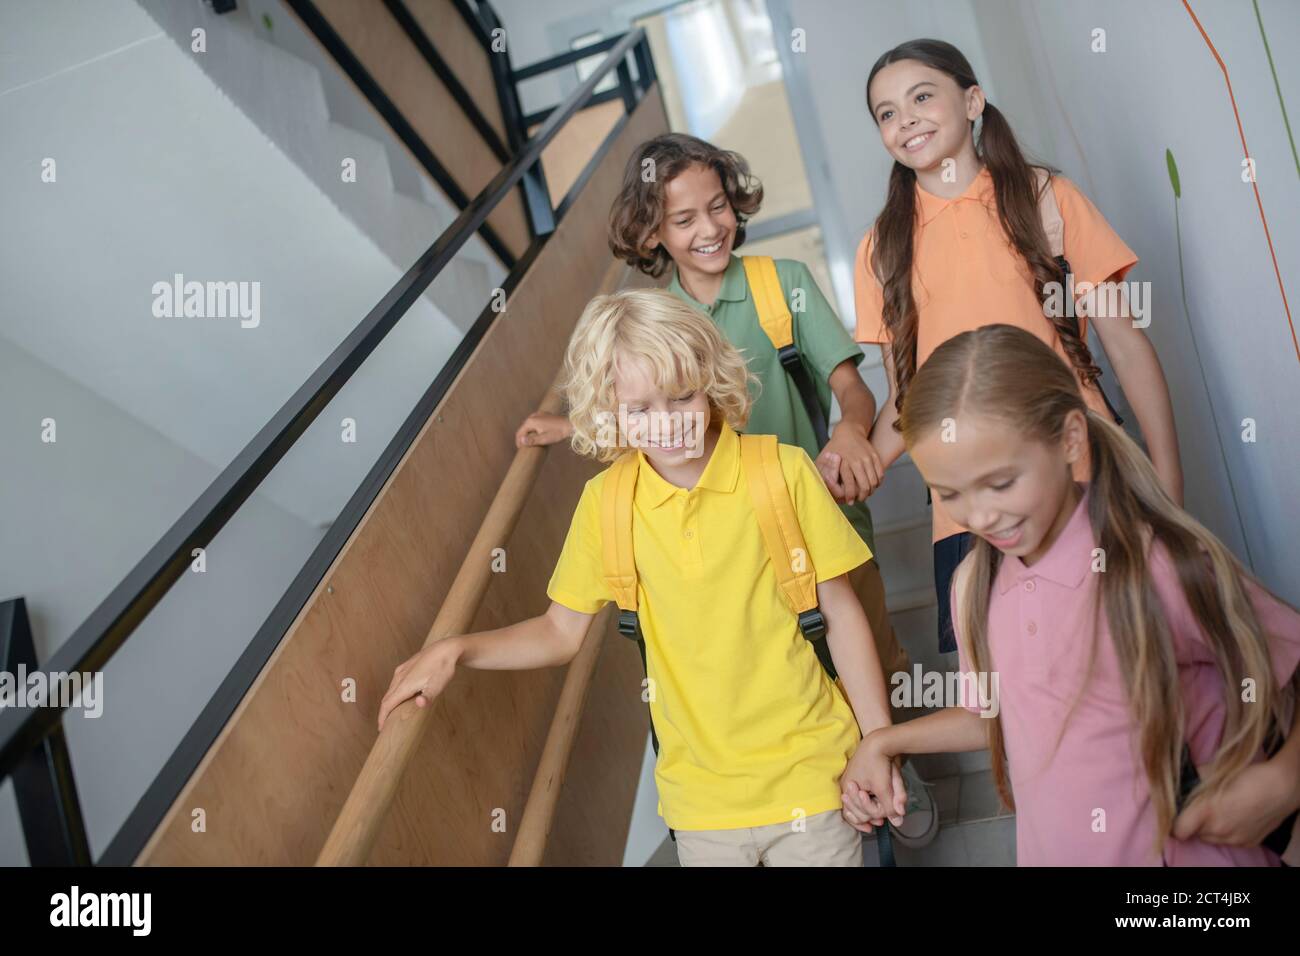 School friends going downstairs, holding hands and looking happy Stock Photo